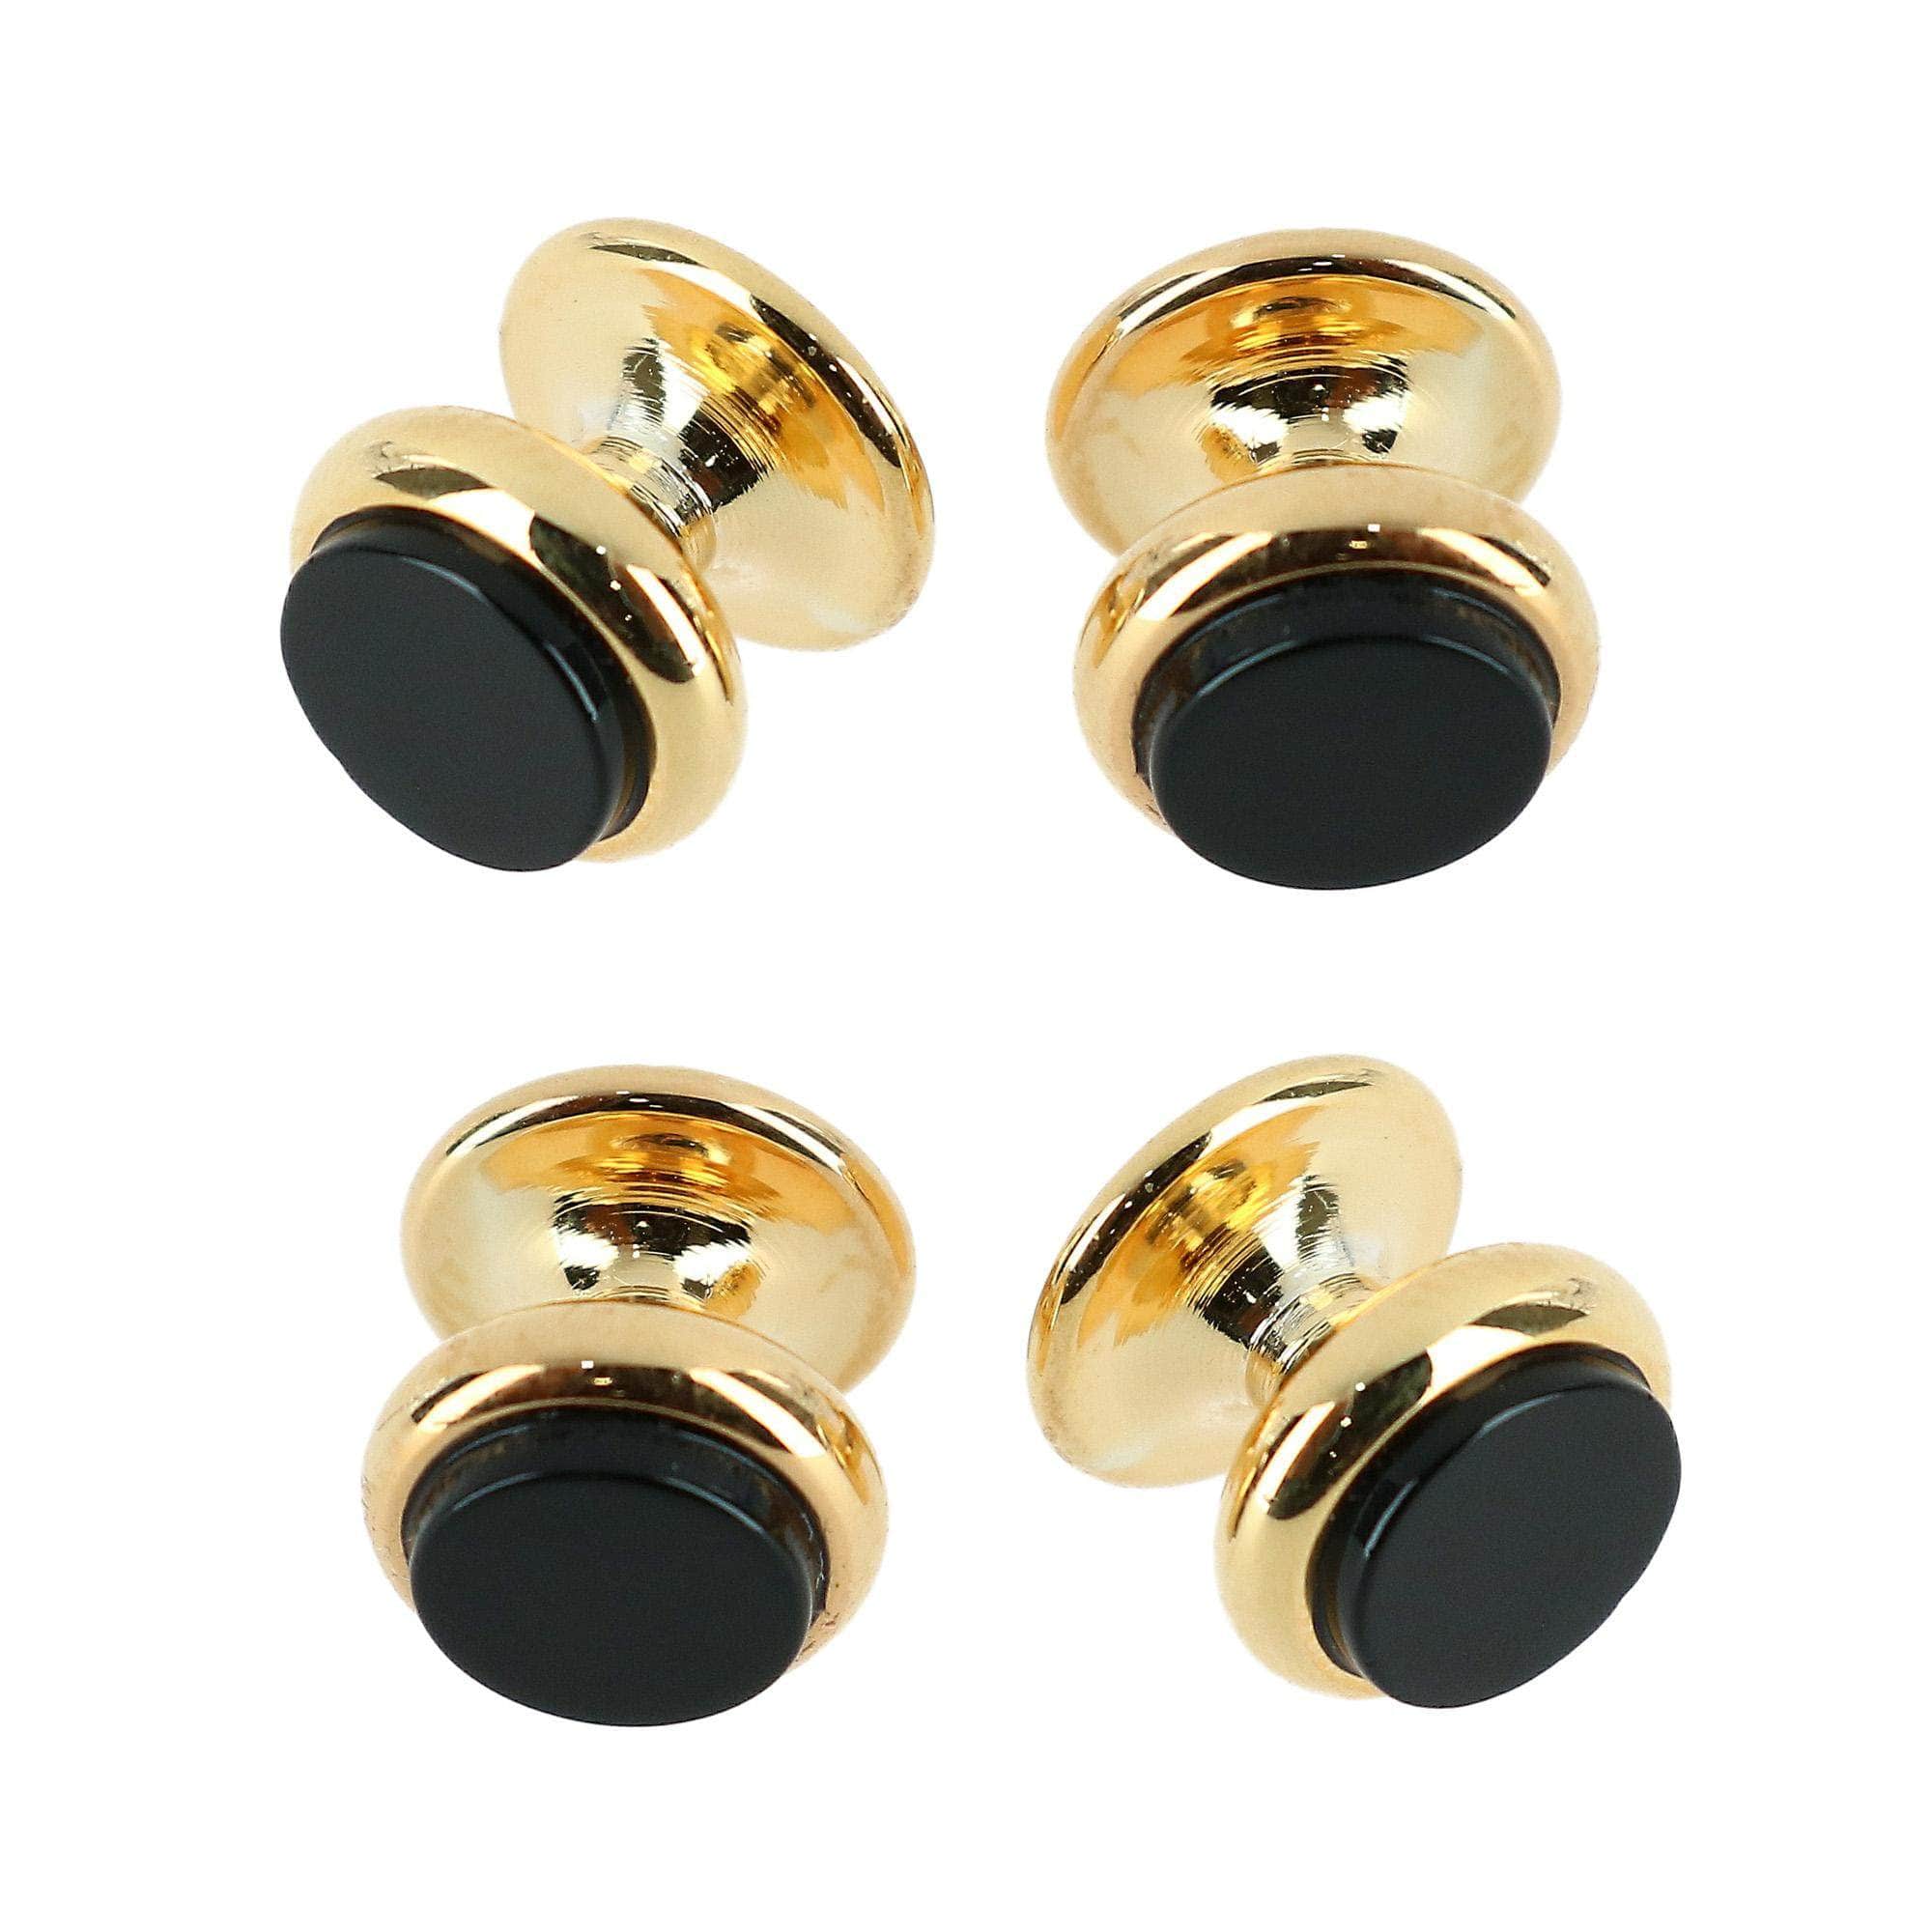 Sutton Mother of Pearl Rhodium Tuxedo Stud Set (4 Pieces) by